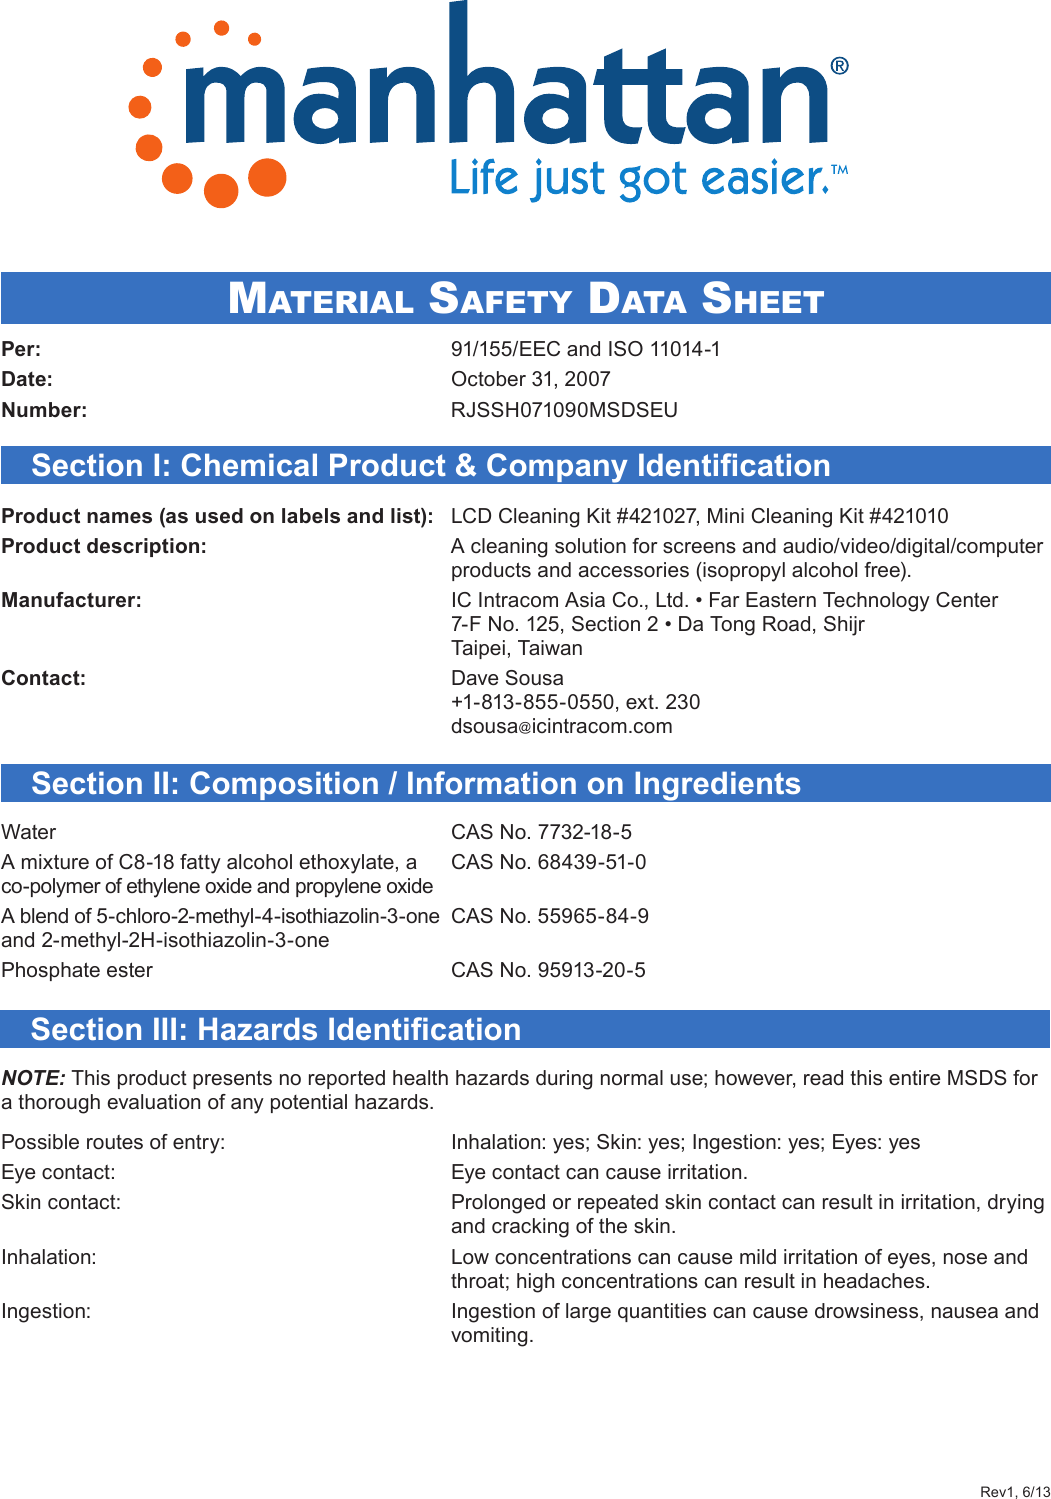 Page 1 of 4 - 421010 MSDS